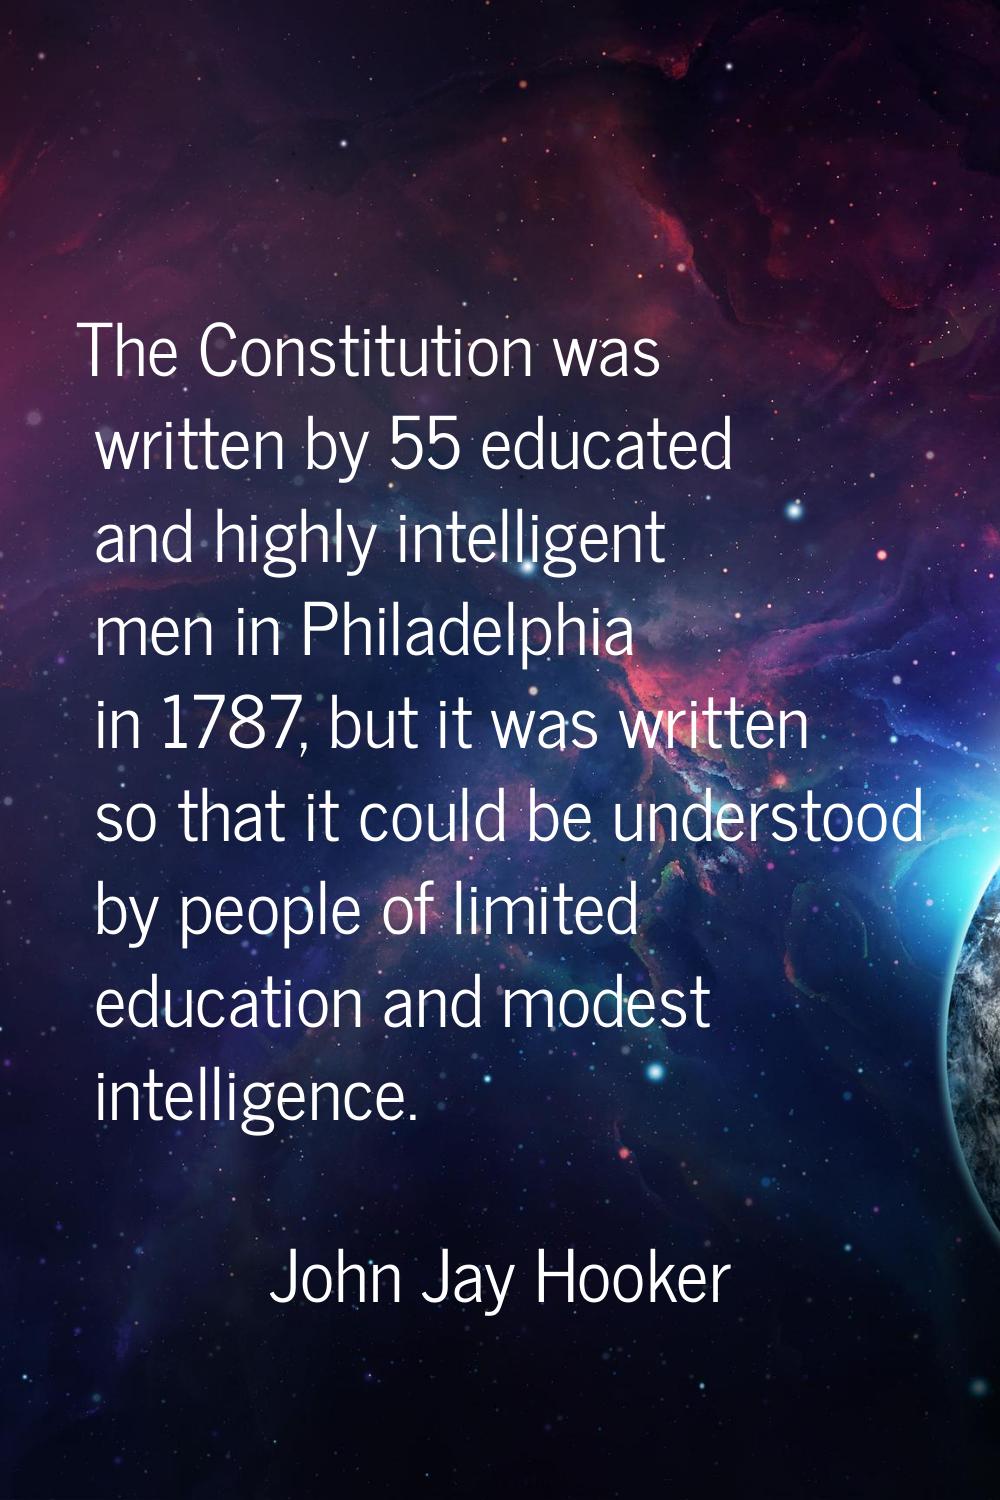 The Constitution was written by 55 educated and highly intelligent men in Philadelphia in 1787, but